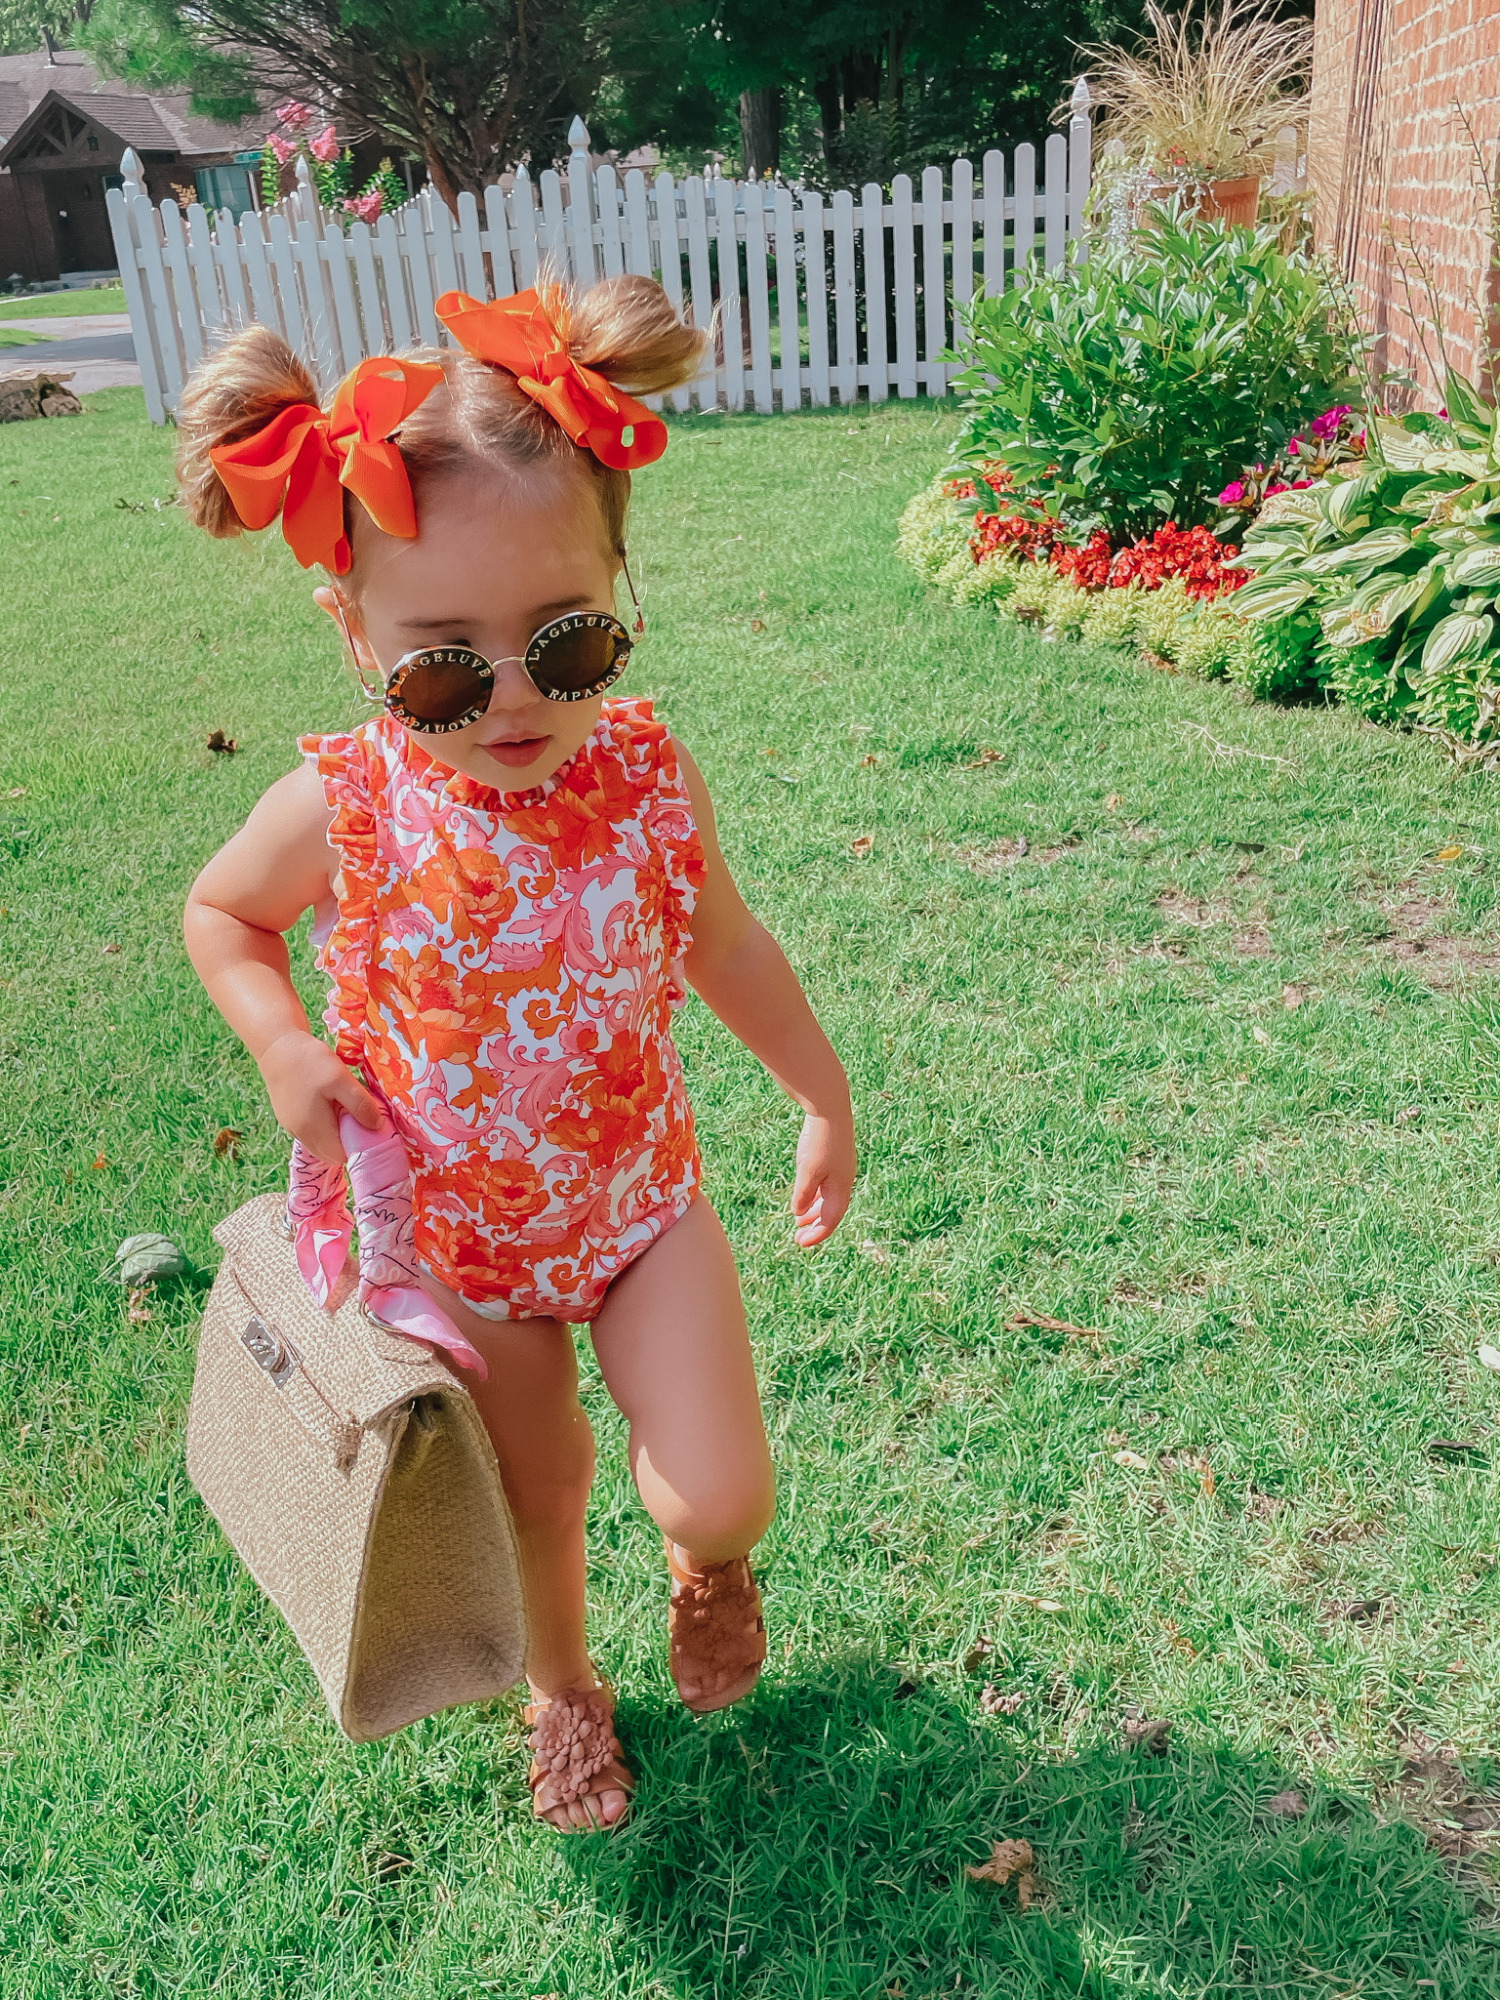 Sophia Gemma, Toddler Swimsuit, Toddler Bows, Swimwear for little girls, Kids Sunglasses, Baby Girl Summer Outfit Ideas | Instagram Recap by popular US life and style blog, The Sweetest Thing: image of a little girl wearing an orange and pink floral print Janie and Jack swimsuit, Zara sandals, orange hair bows, and holding a woven handbag. 